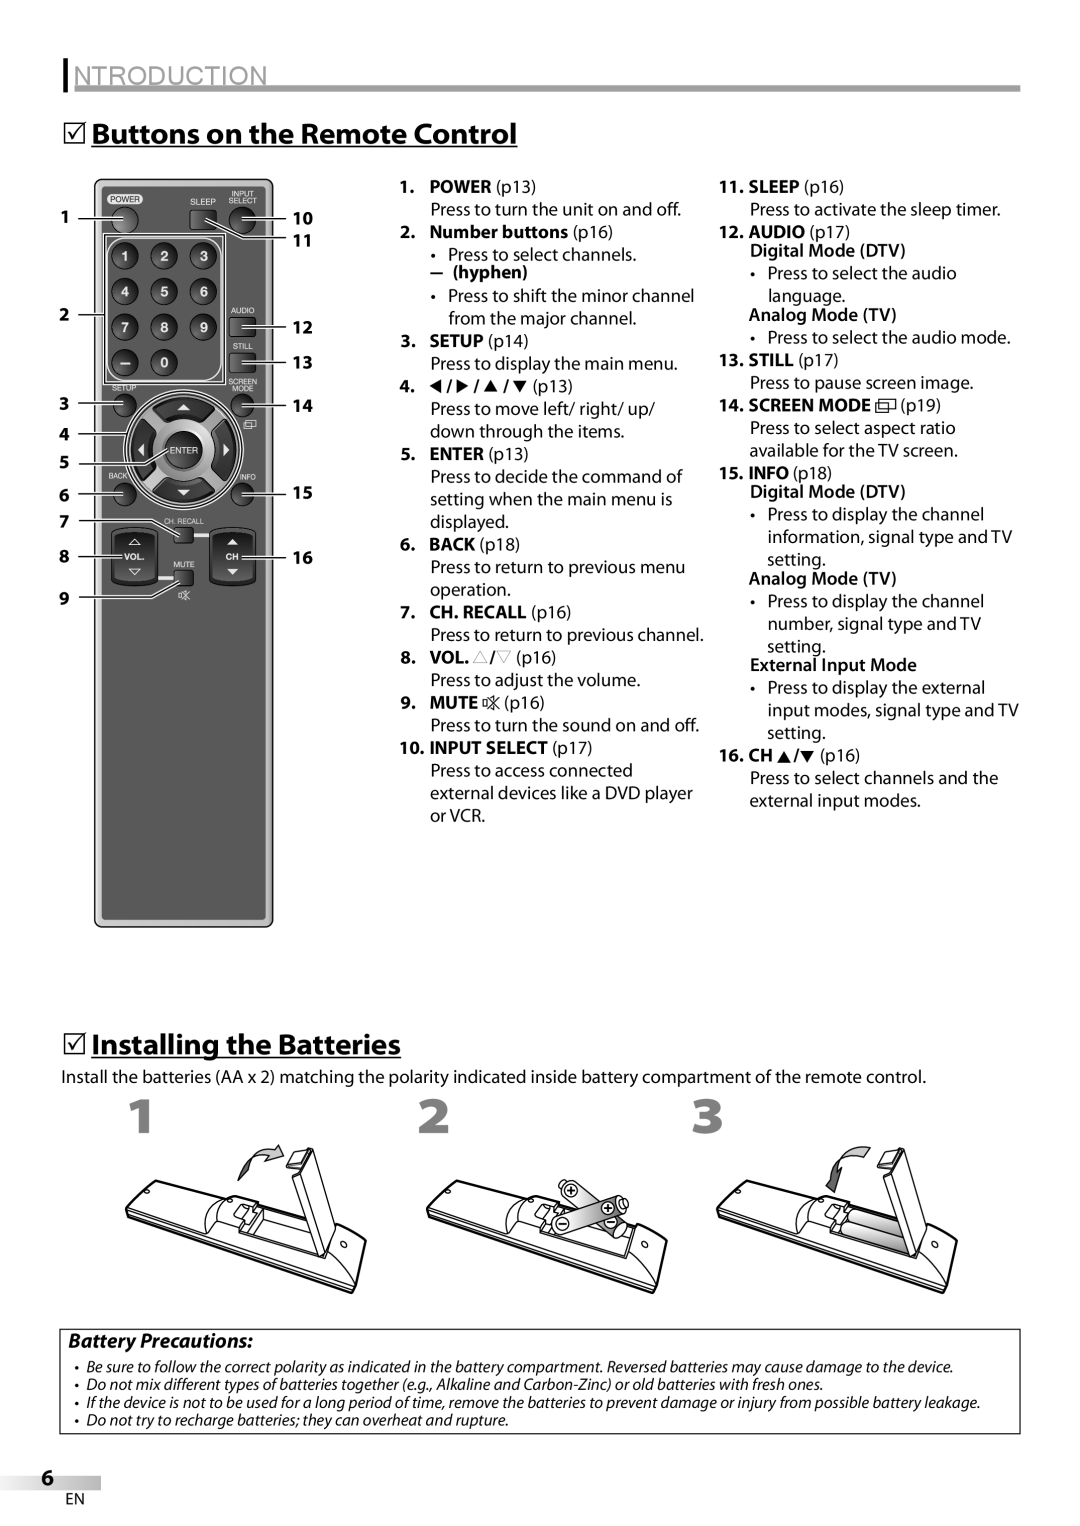 Emerson LC420EM8 owner manual 5Buttons on the Remote Control, 5Installing the Batteries, Introduction, Battery Precautions 